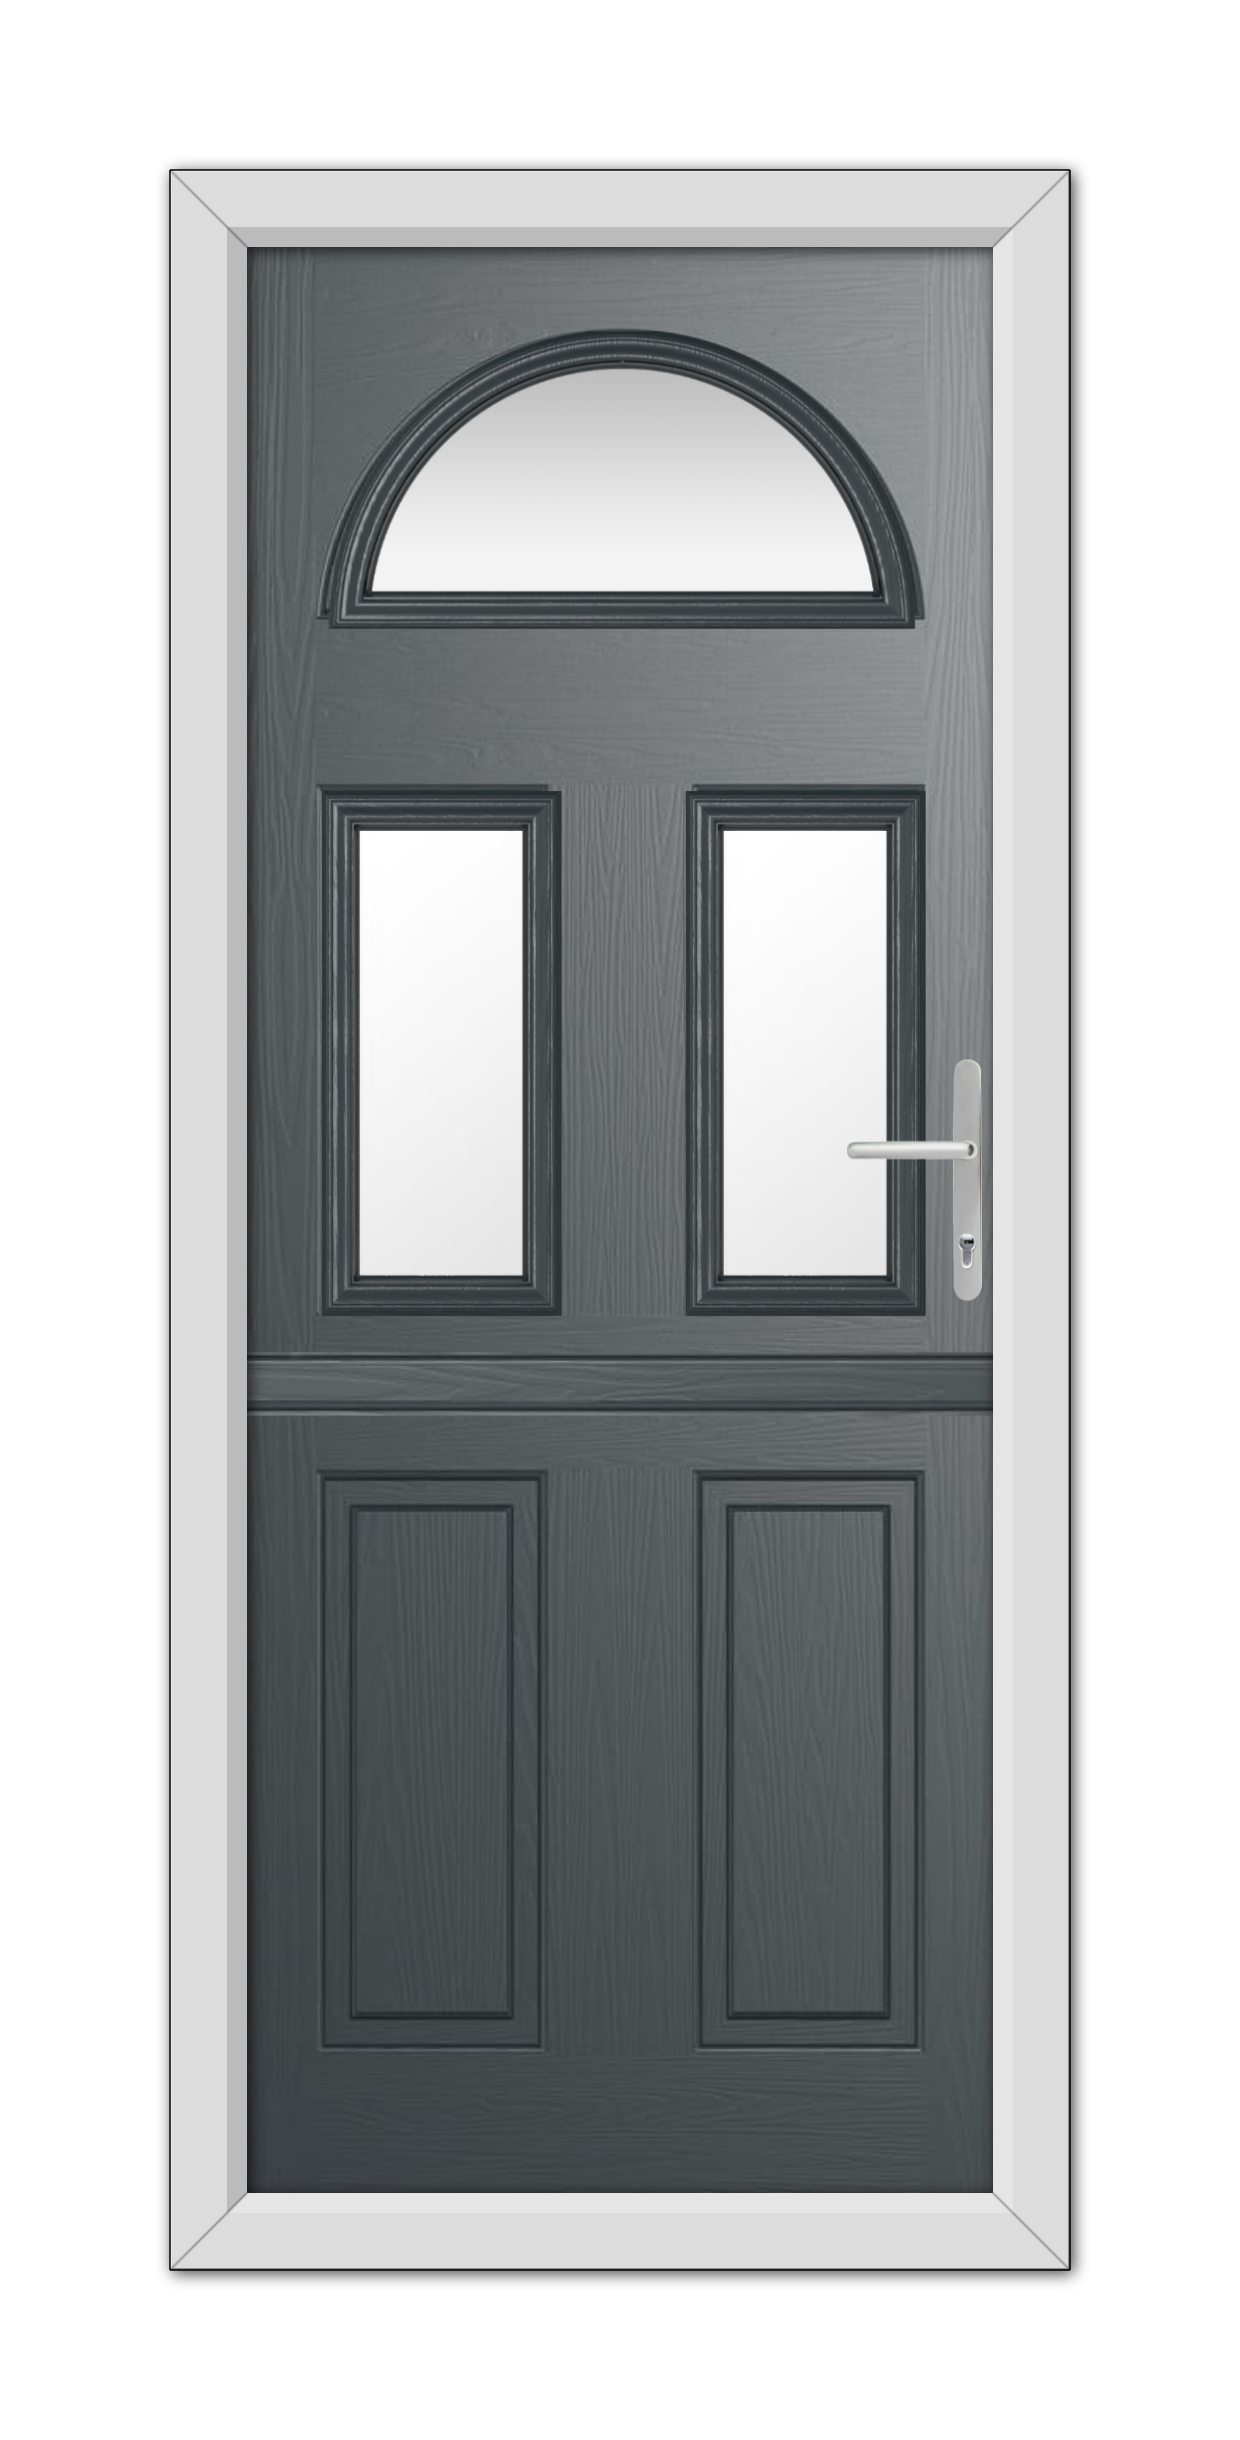 A modern Anthracite Grey Winslow 3 Stable Composite Door 48mm Timber Core with an arched window at the top and two rectangular panels, each with a smaller window, set in a white frame.